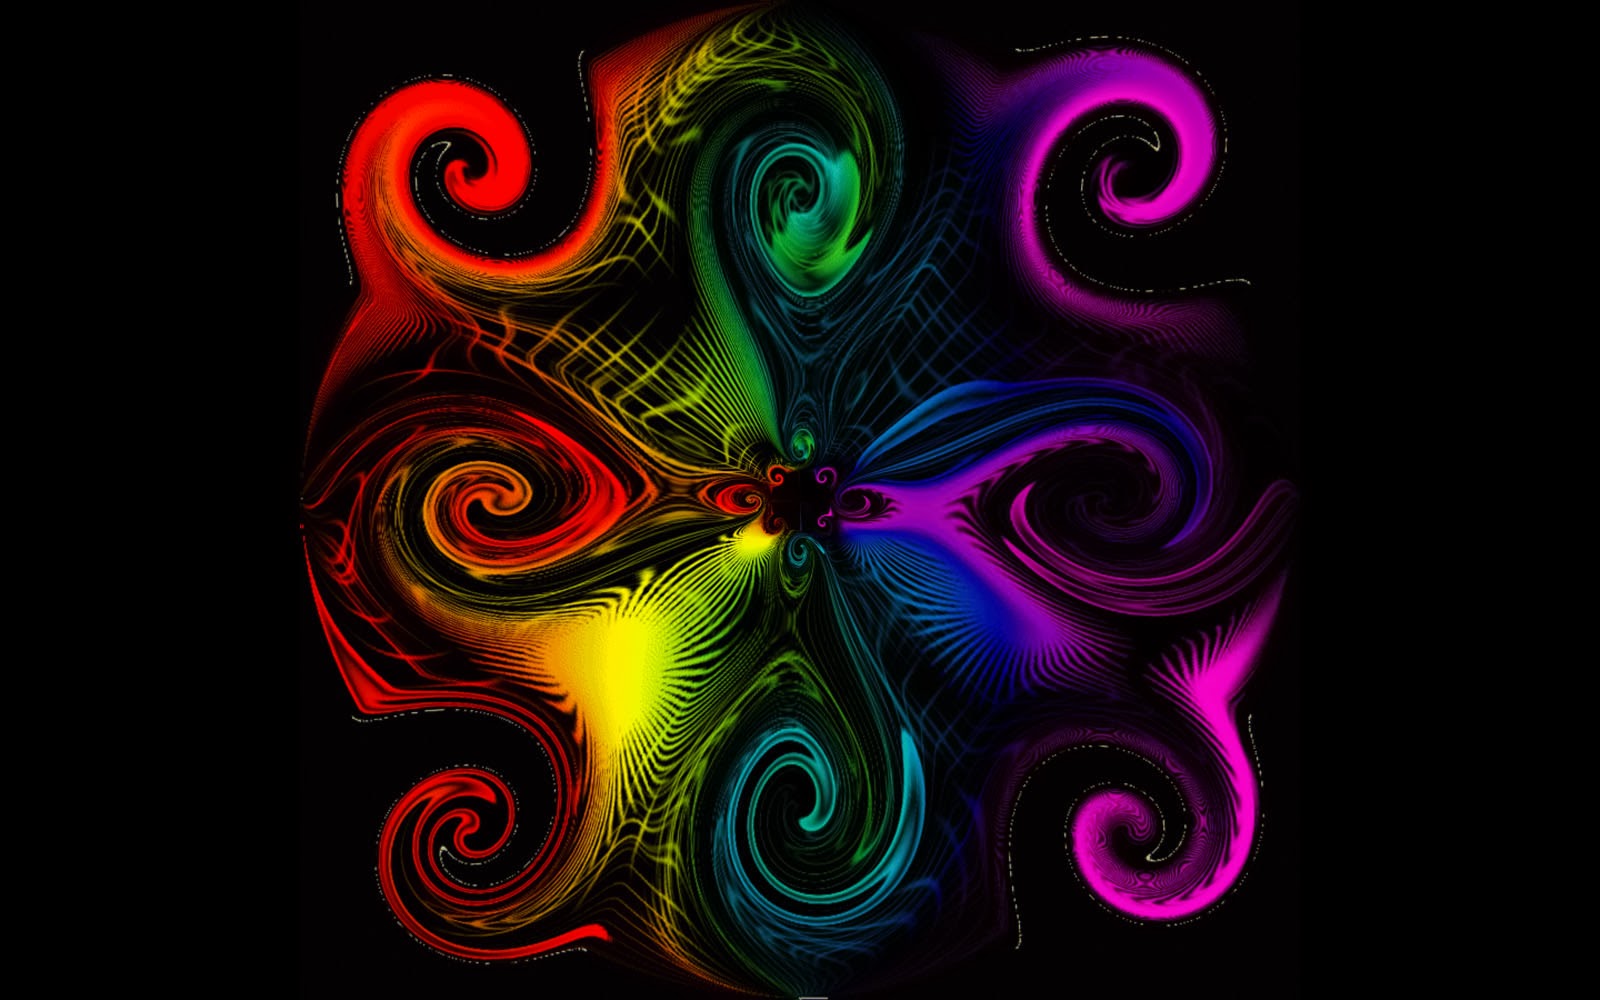 Wallpapers Colorful Swirls Wallpapers HD Wallpapers Download Free Images Wallpaper [wallpaper981.blogspot.com]